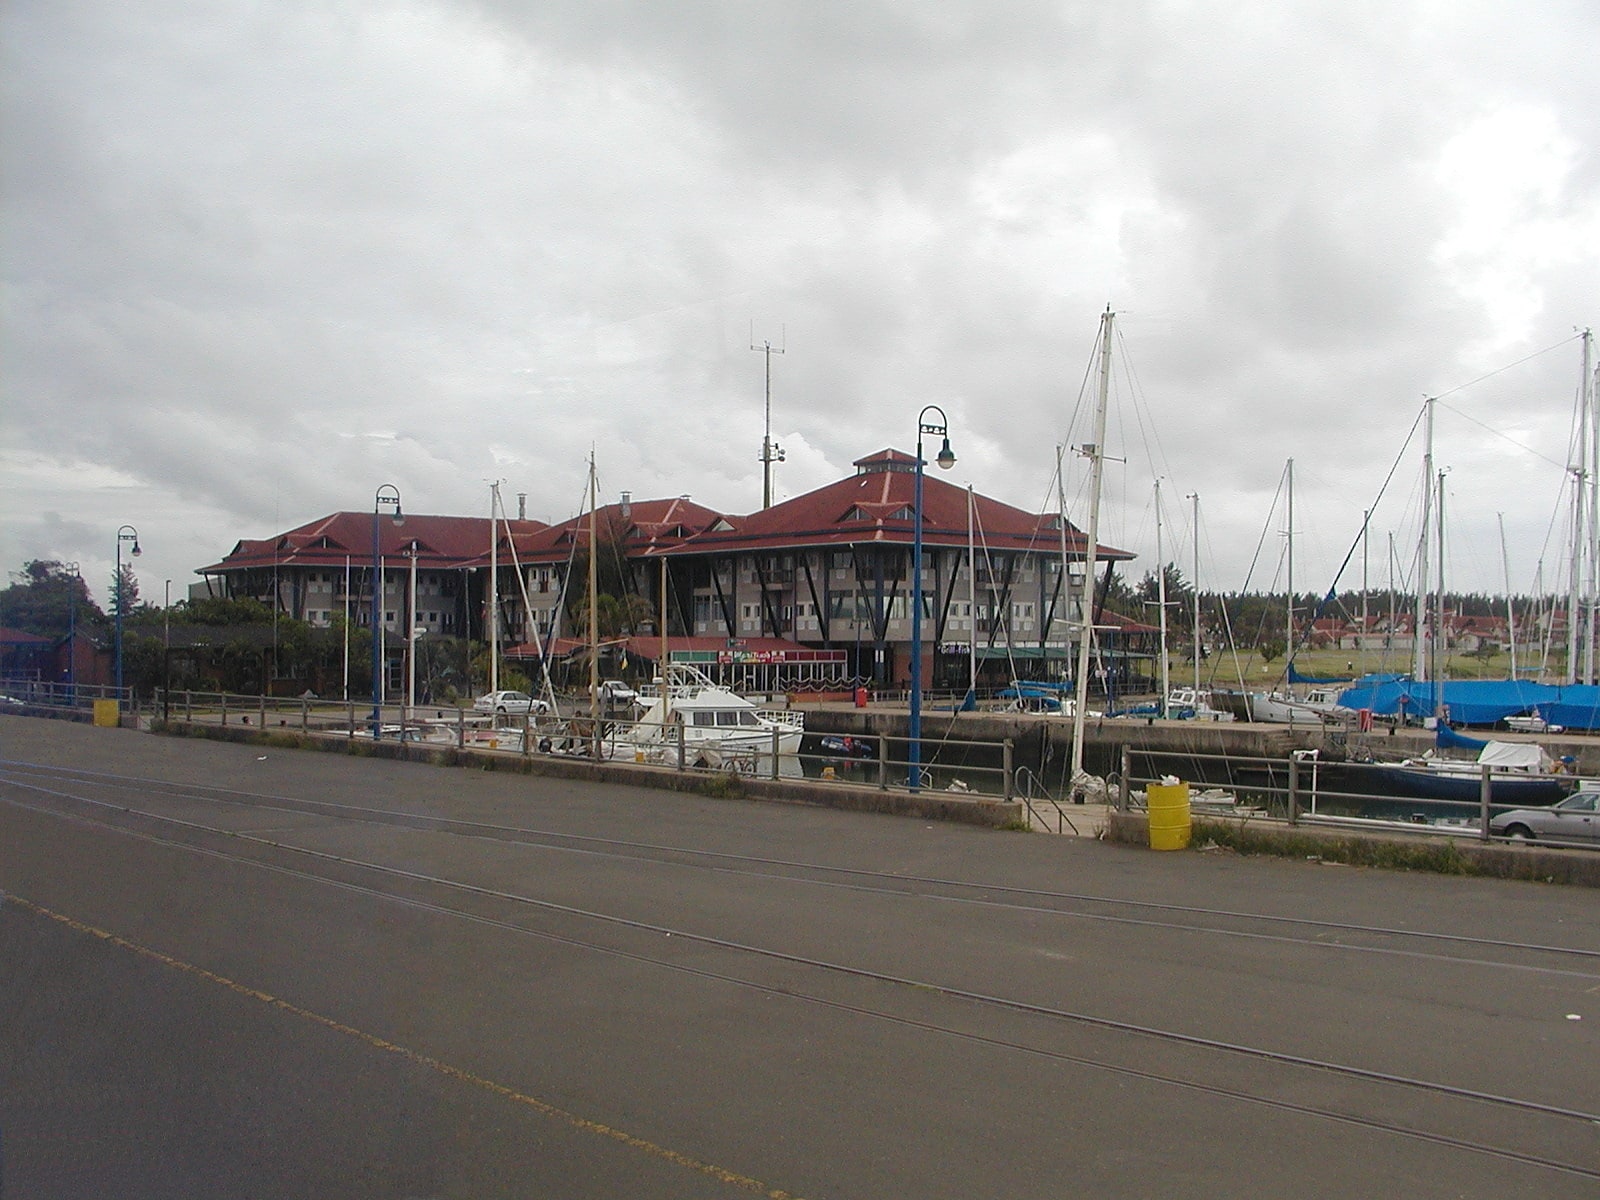 Richards Bay, South Africa